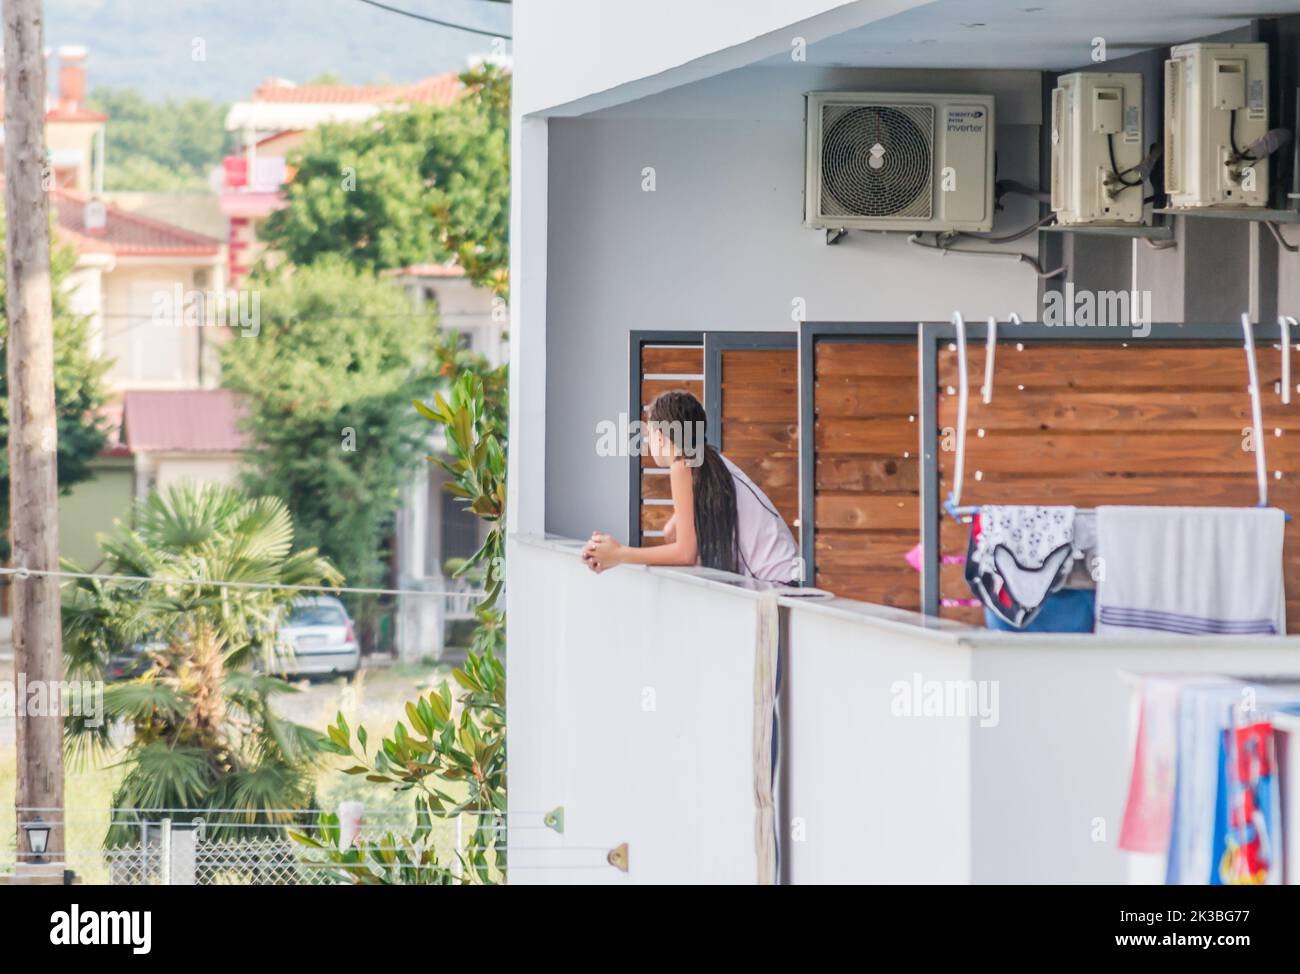 Leptokarya, Greece - June 10, 2018: A view of the guests of a private hotel in the small quiet town of Leptokaria, Greece. Stock Photo